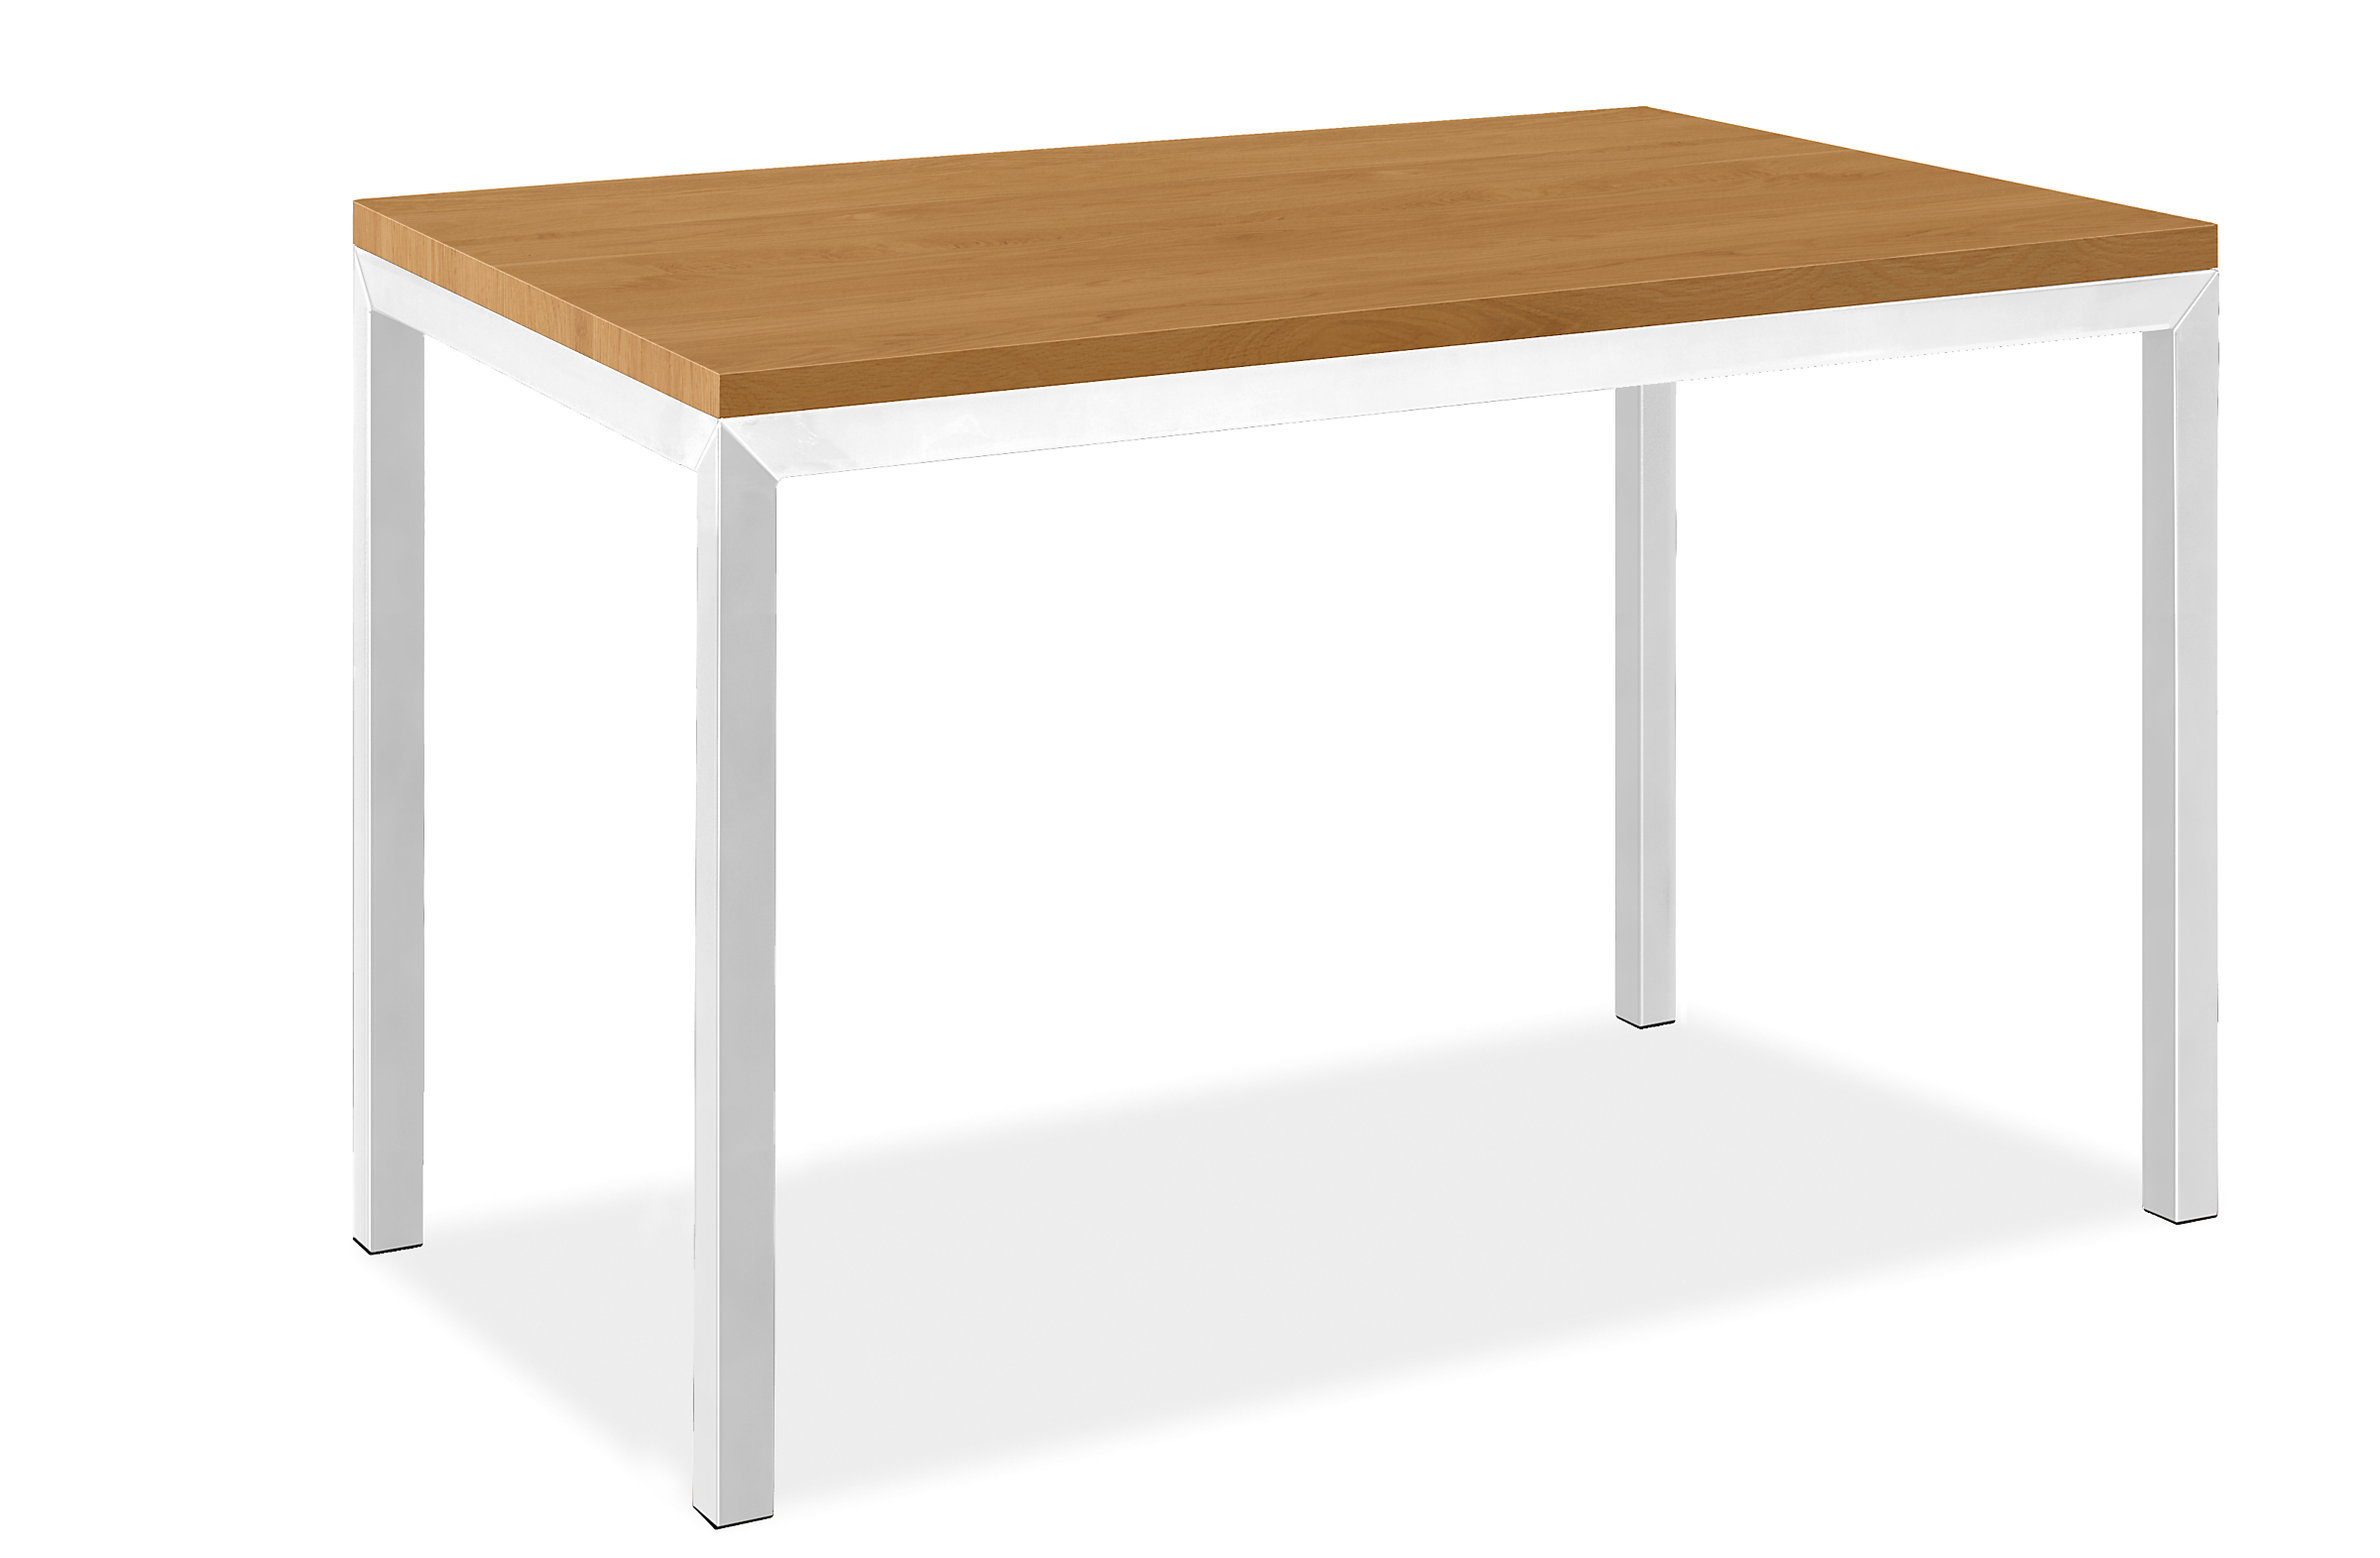 Parsons 60w 30d 35h Counter Table with 2" Leg